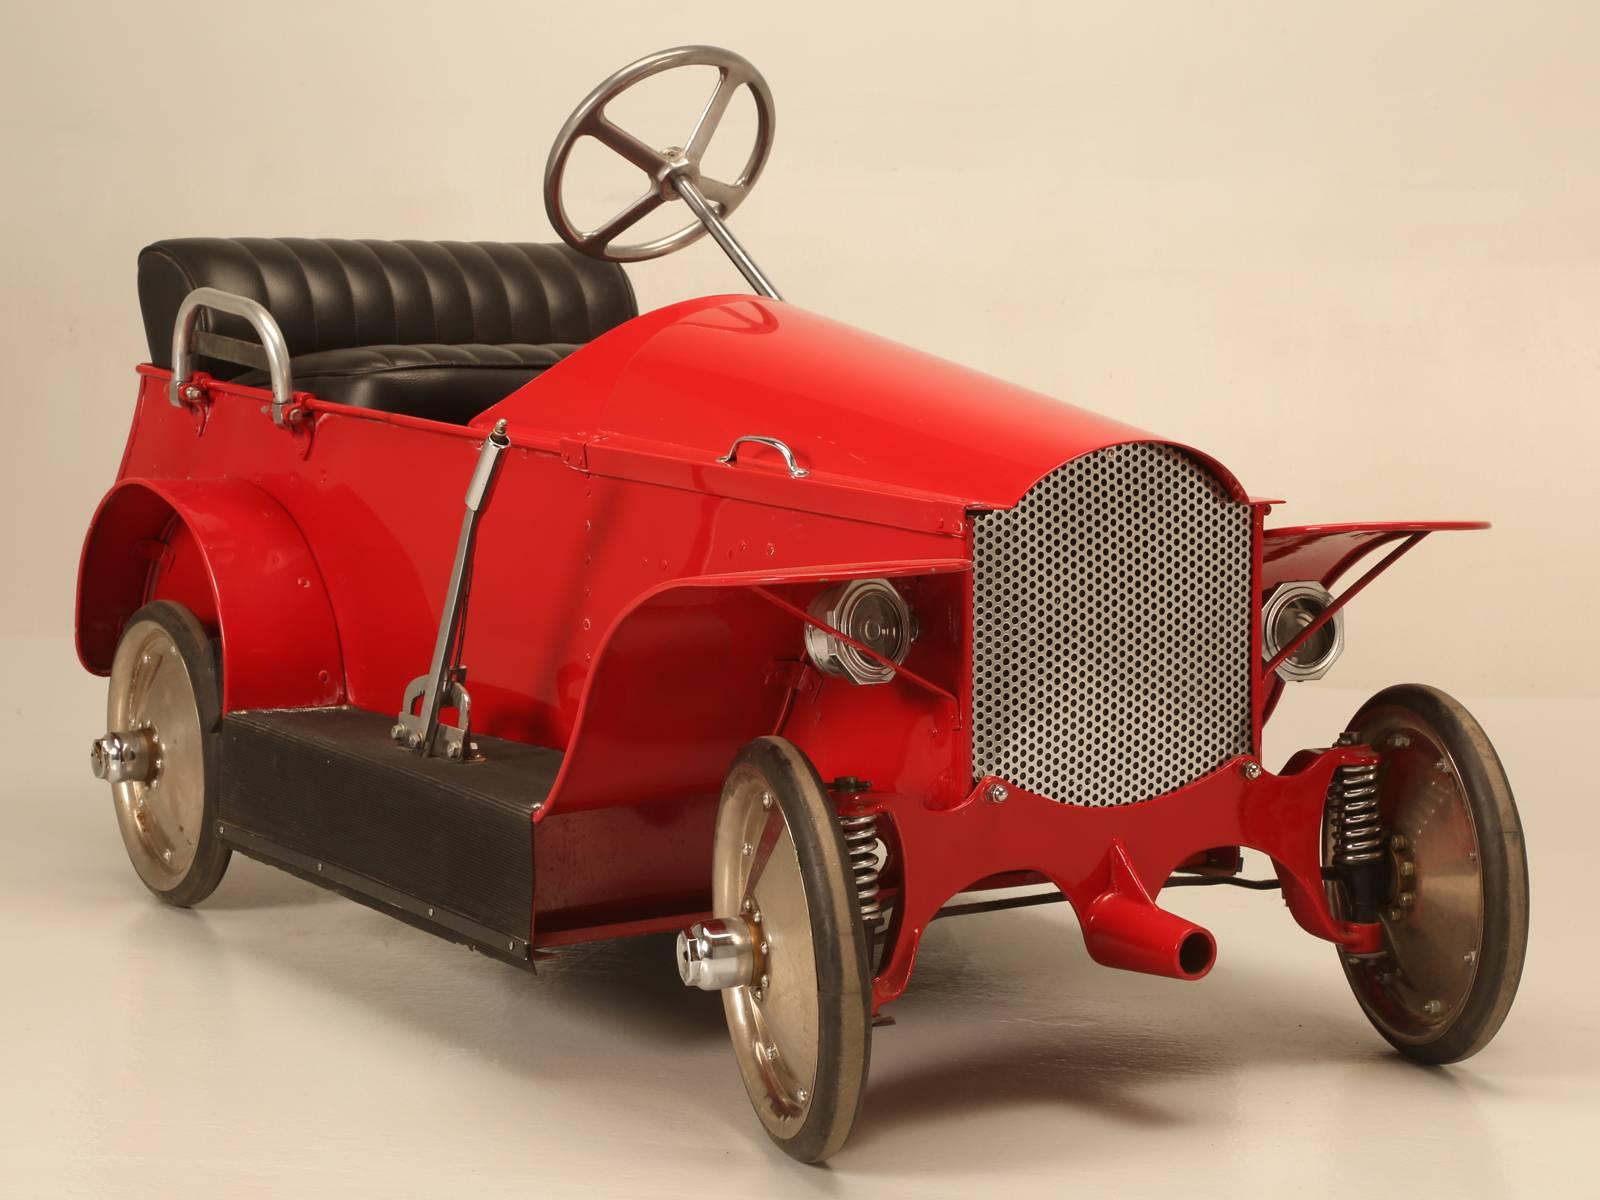 Certainly, the most unusual Child’s Battery Powdered Electric Car I have ever seen. As the story was told to me back in the 1970’s, it was actually produced for the owner of an amusement park, who had a difficult time walking his extensive grounds.